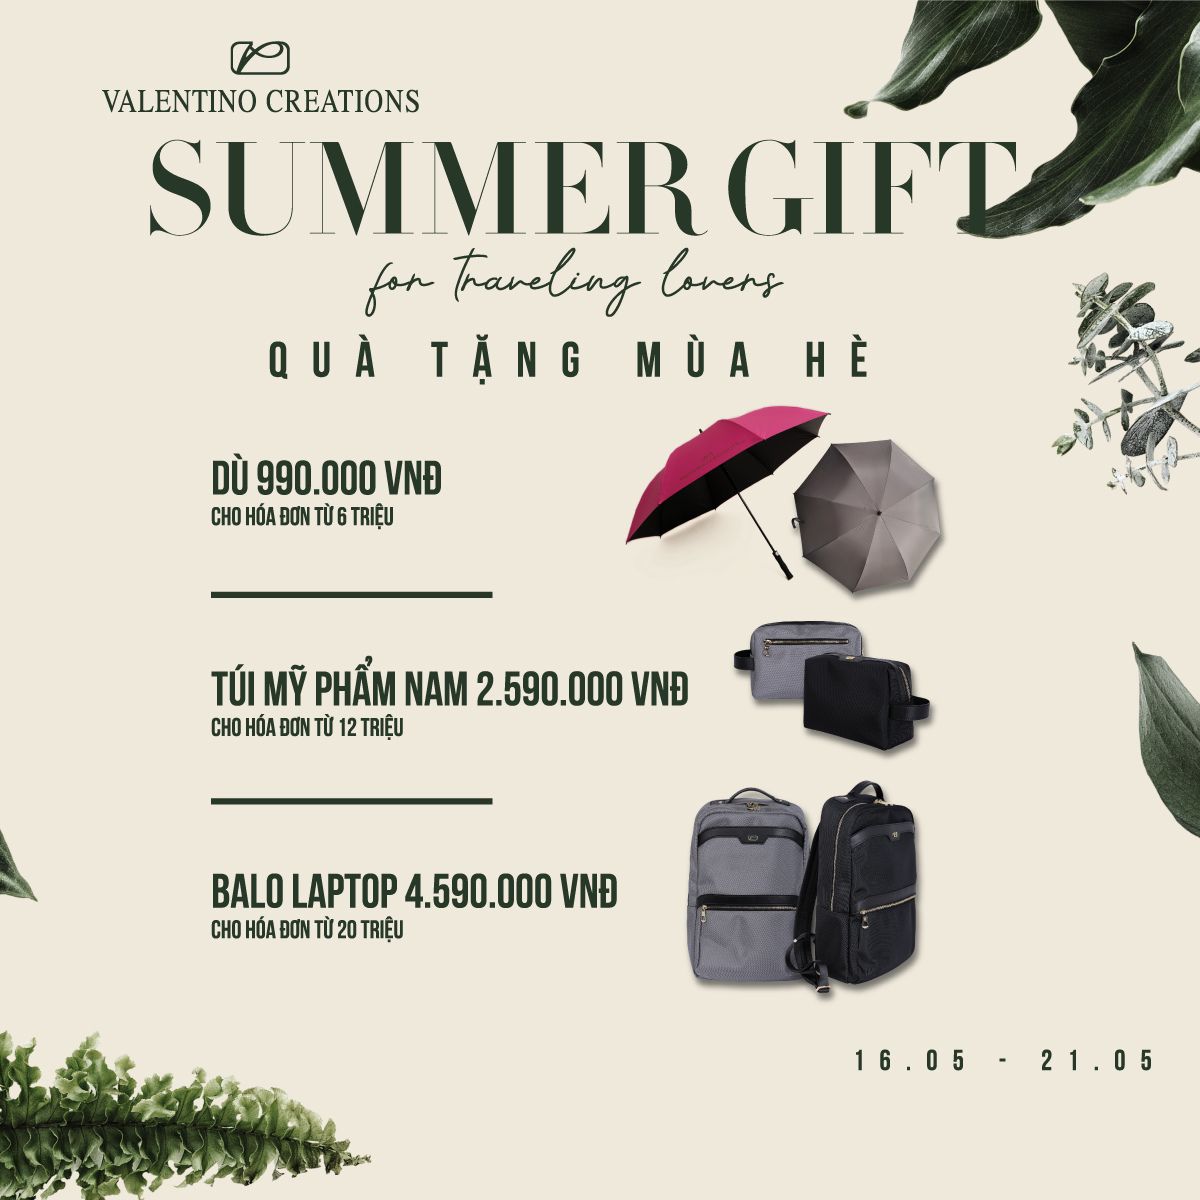 SUMMER GIFT UP TO 4.590.000 VNĐ FOR TRAVELING LOVERS